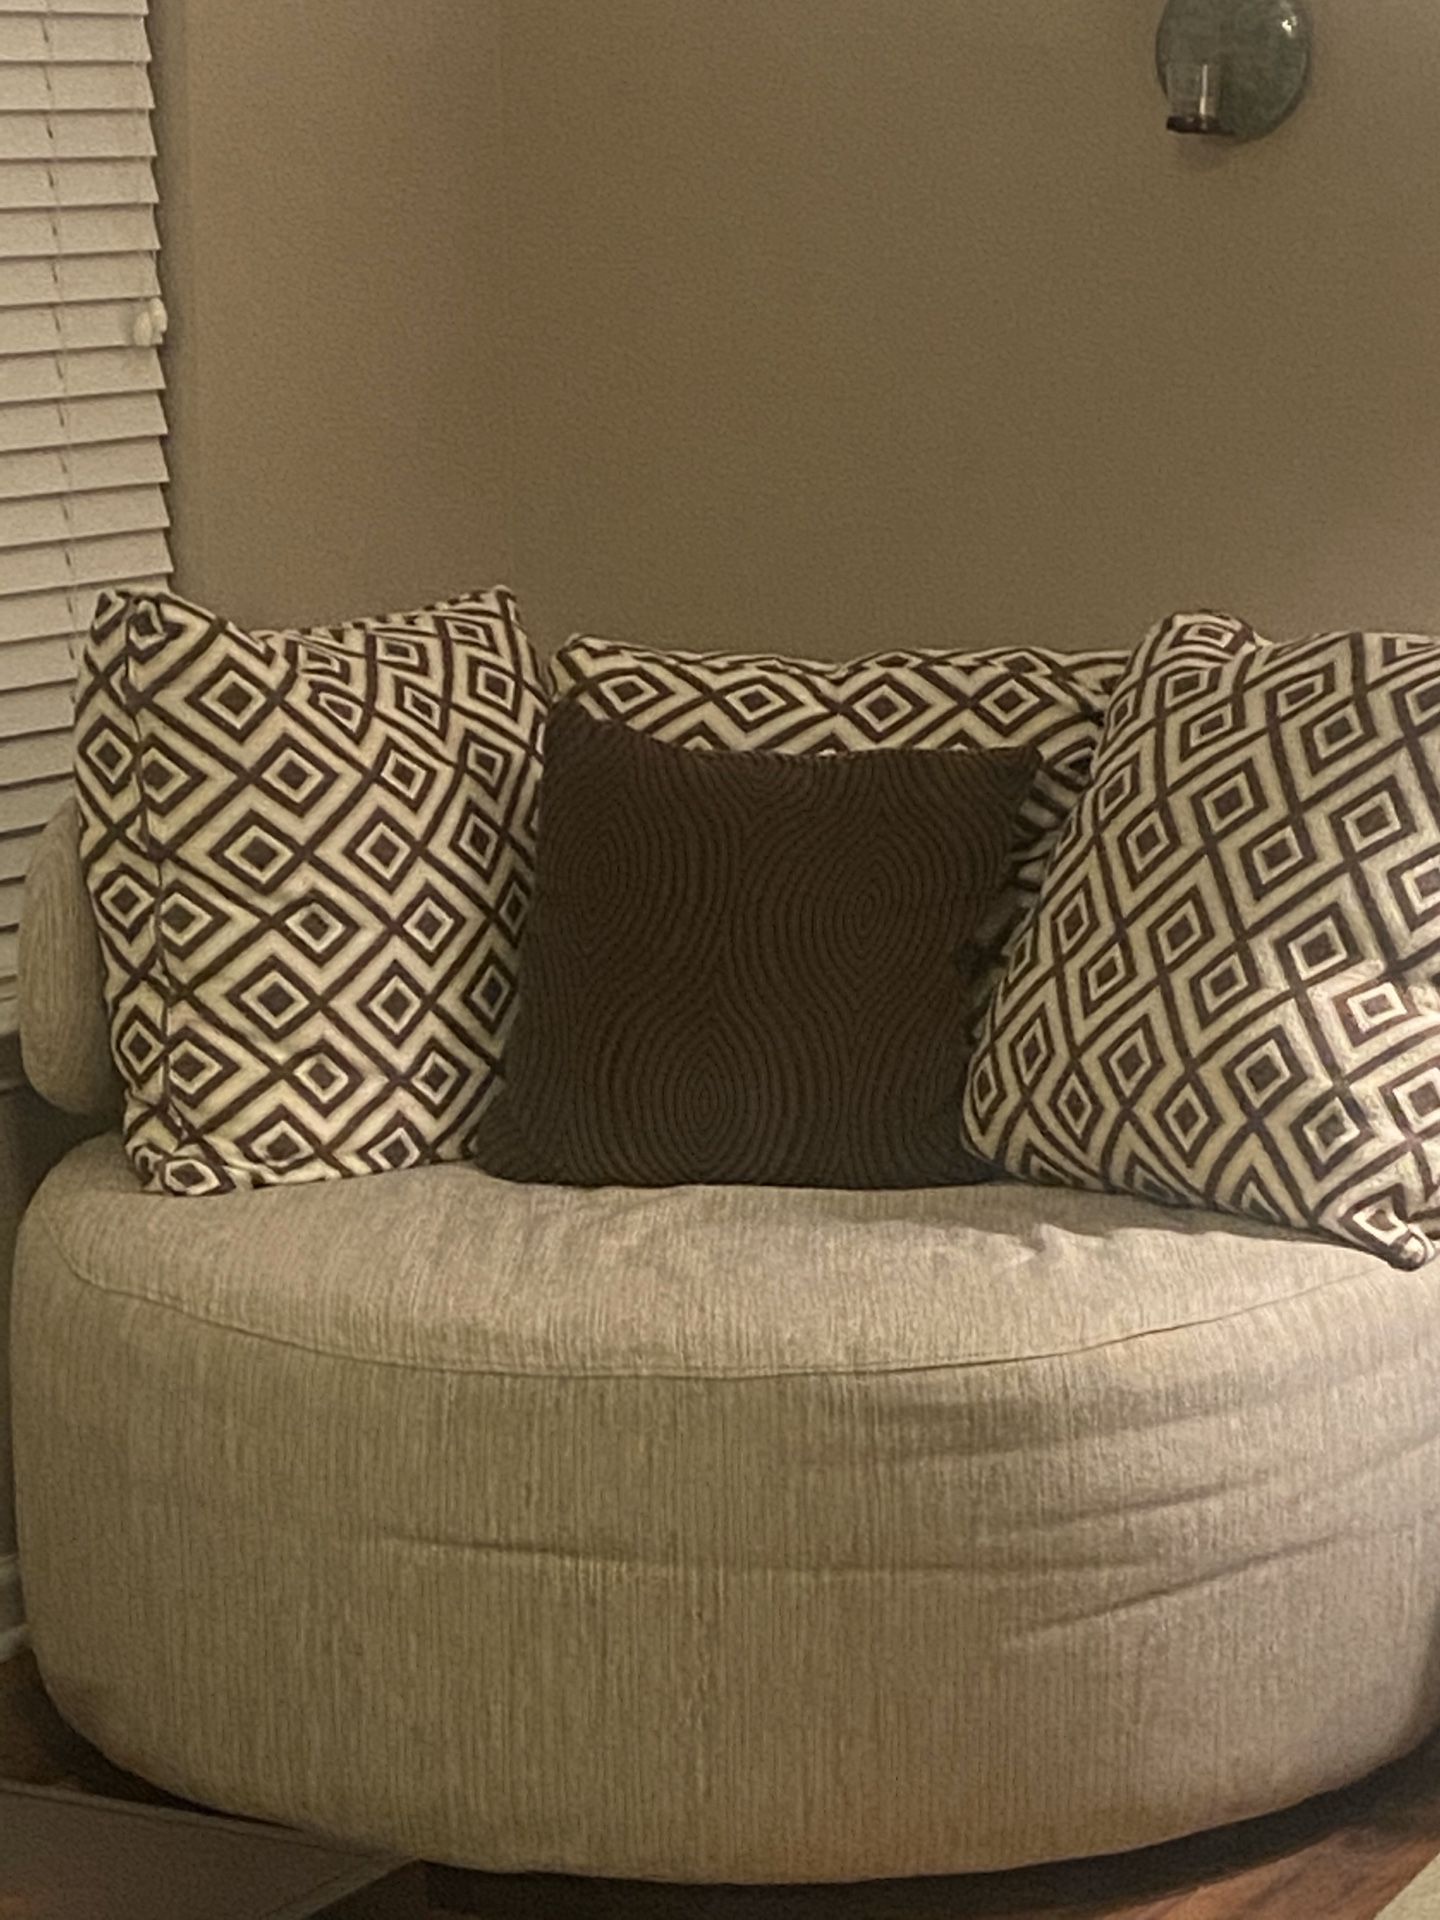 Sectional w/ pillows and end table